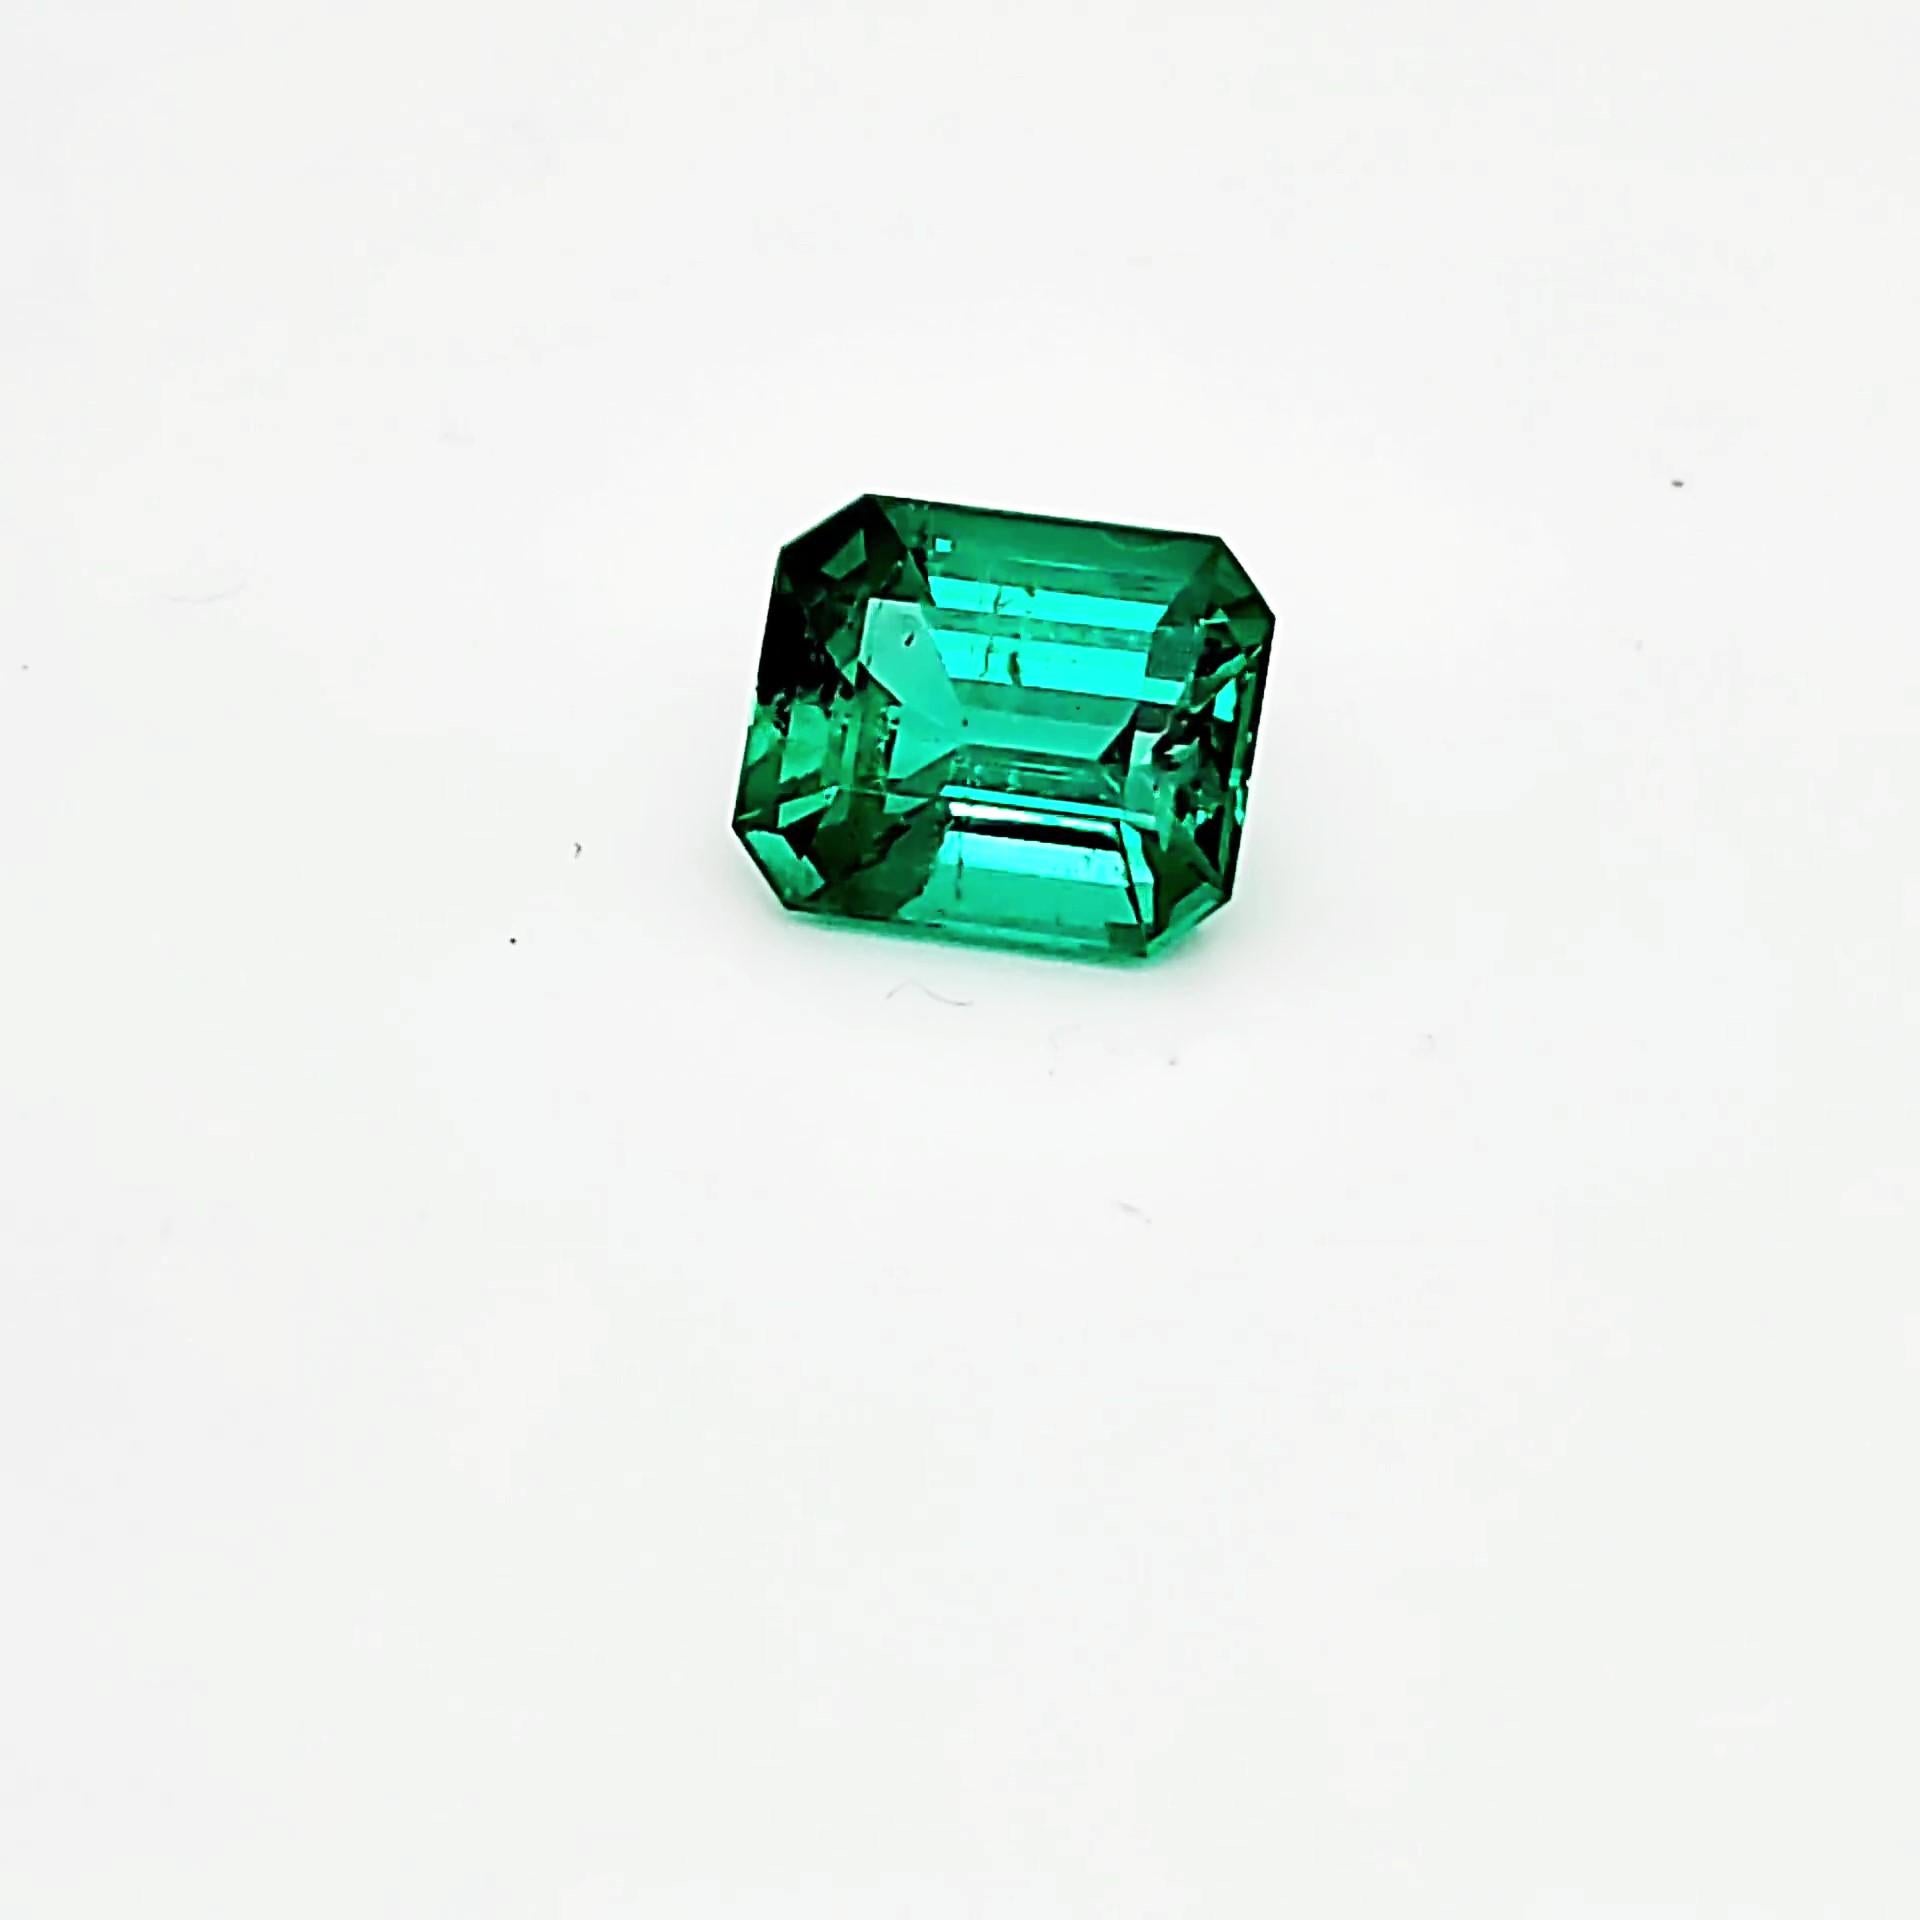 FERRUCCI 4.53 ct Emerald, GIA Certified stunning clean mineral, with only a few natural inclusions typical of the Emerald. 
Intense green color 